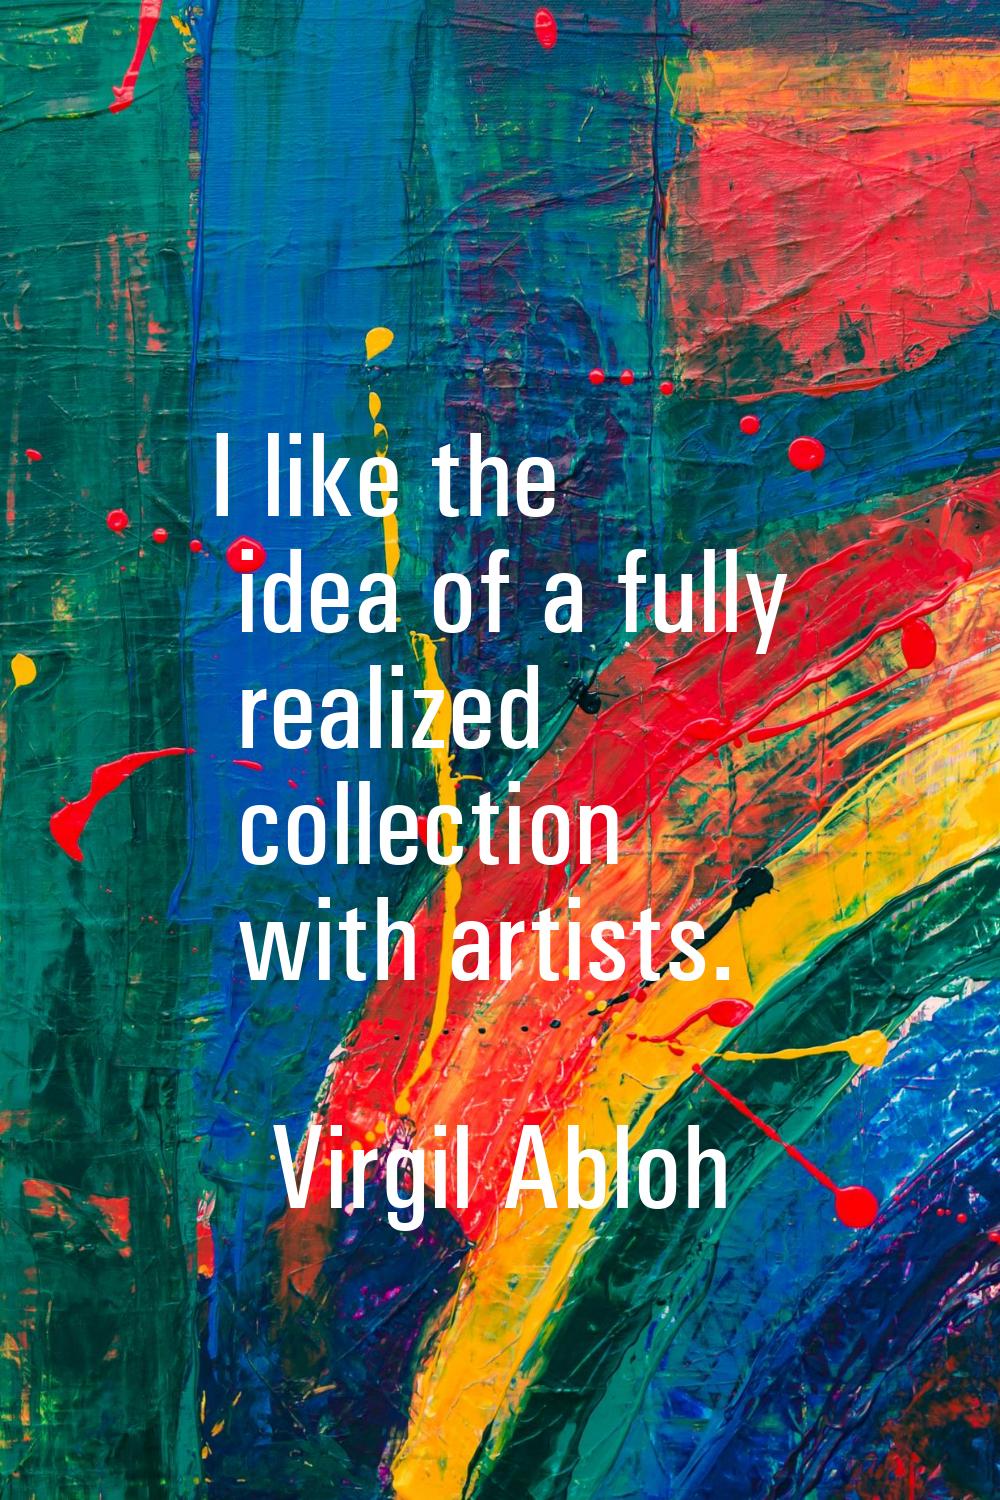 I like the idea of a fully realized collection with artists.